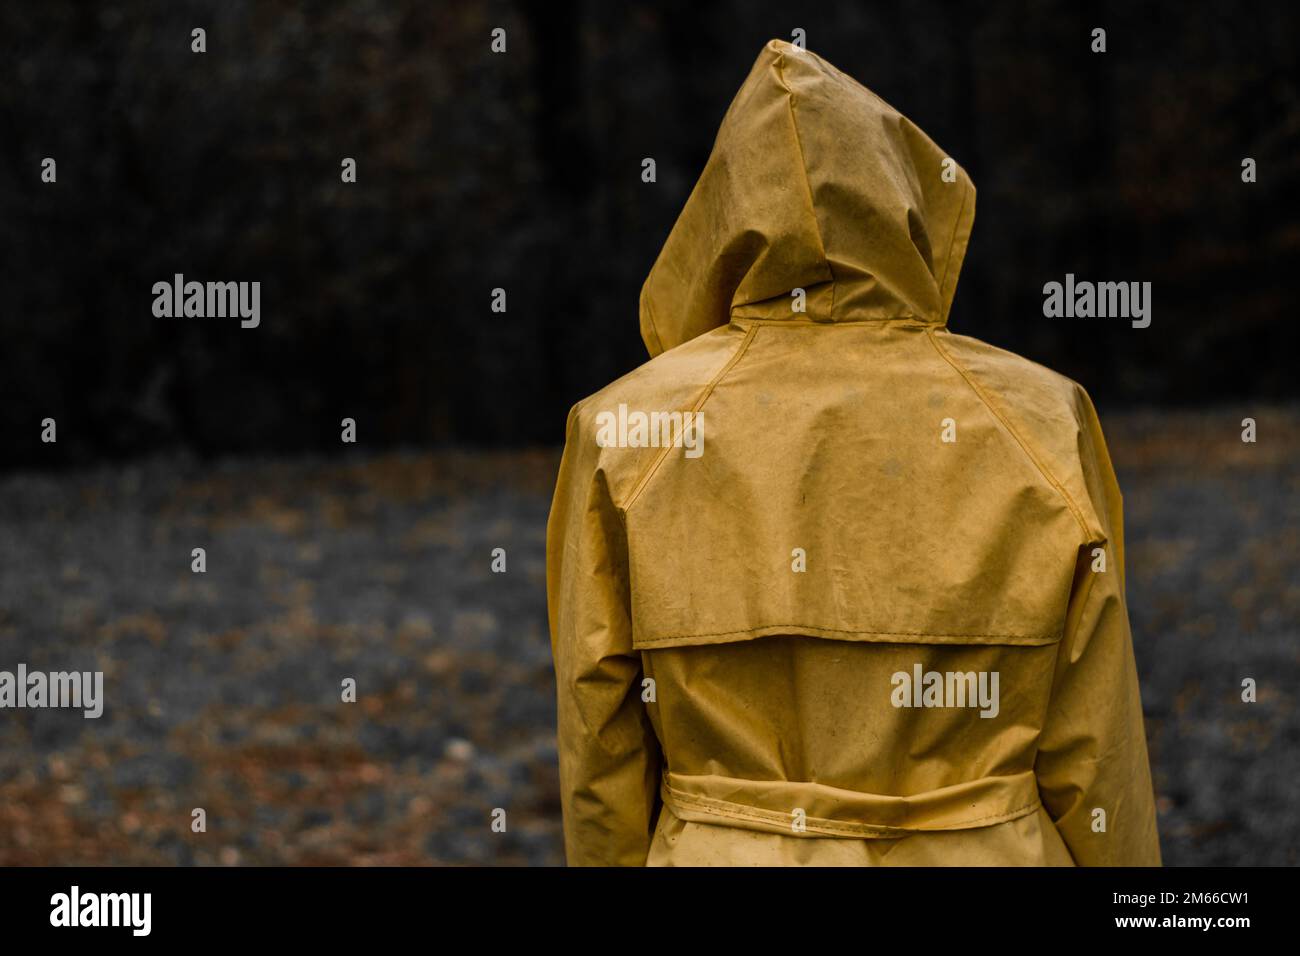 Mysterious woman covered by yellow coat while raining. The figure has his back with his face covered, looks towards the dark forest. Selective colors. Stock Photo